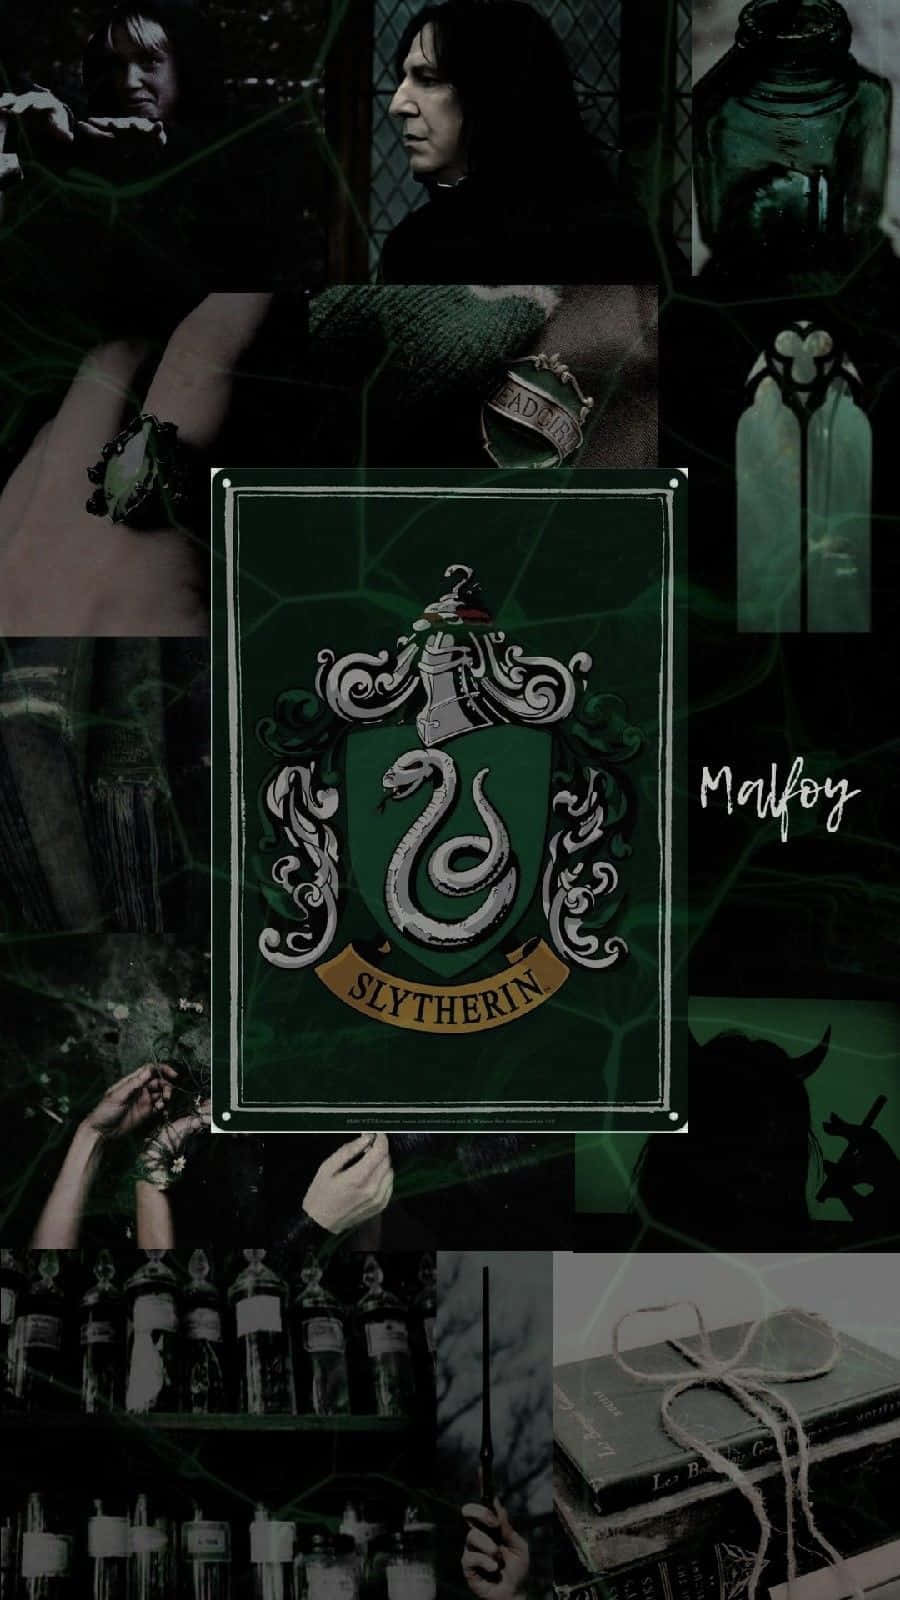 HP  Slytherin wallpaper by Thanyx  Download on ZEDGE  f7d1